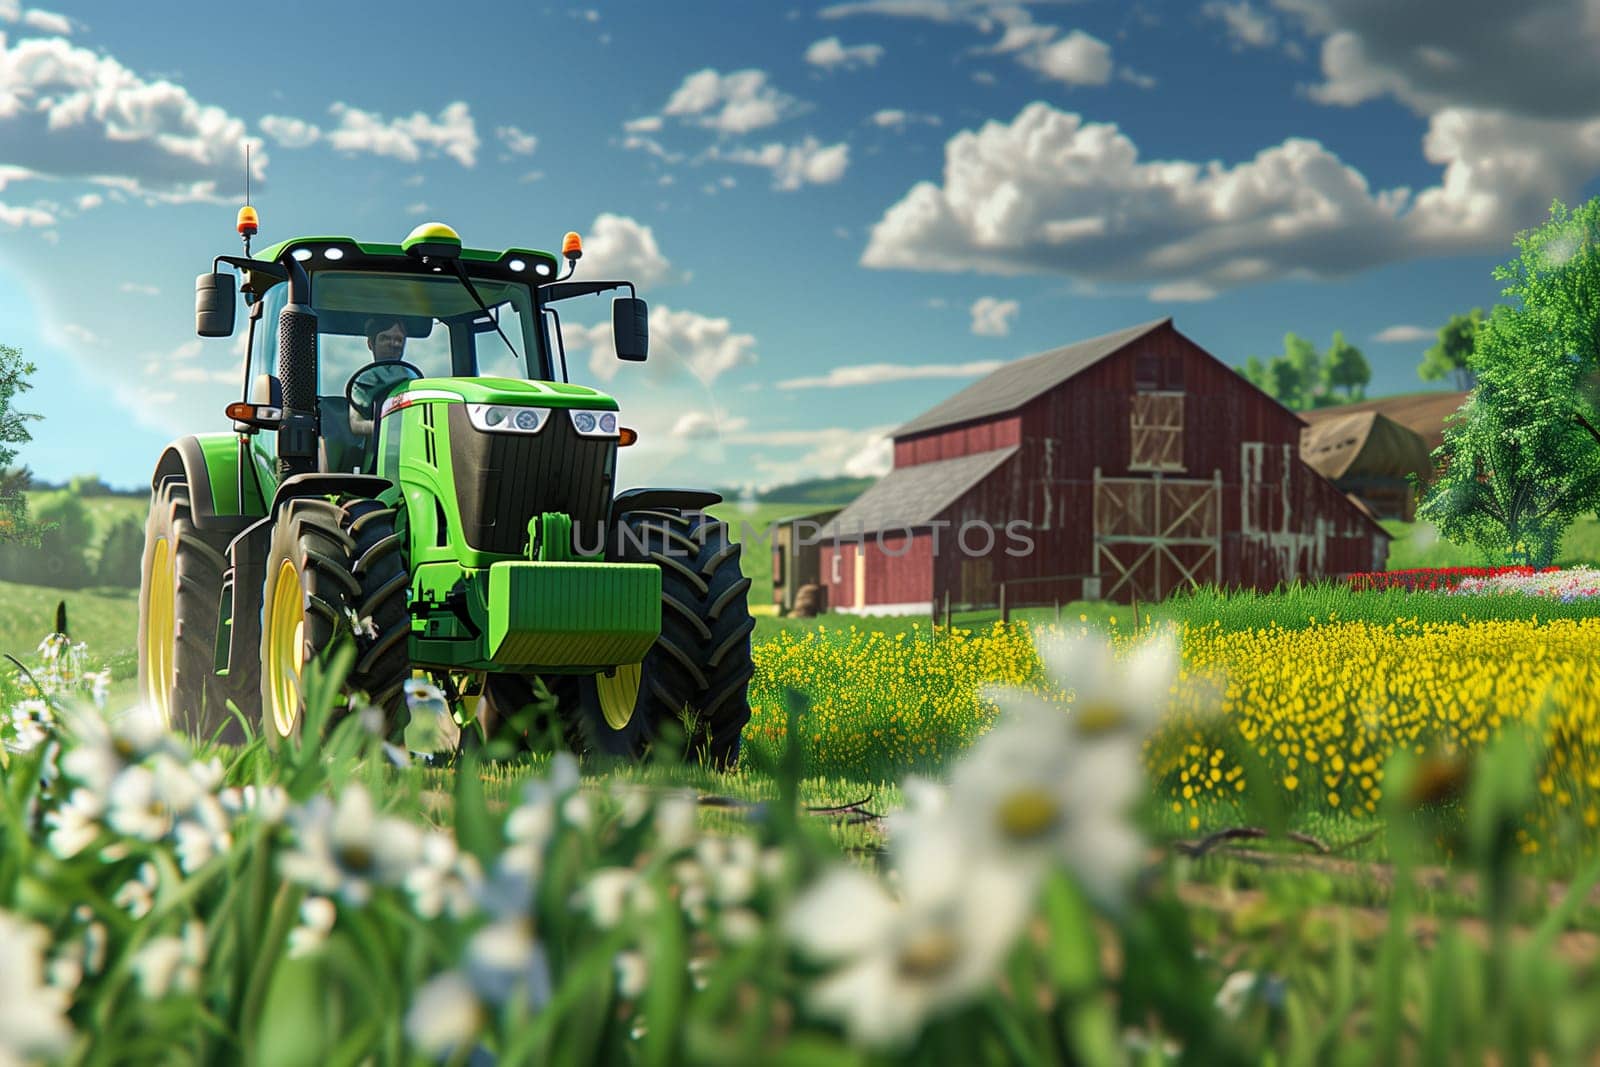 A tractor plowing a field with a barn visible in the background on a sunny day.